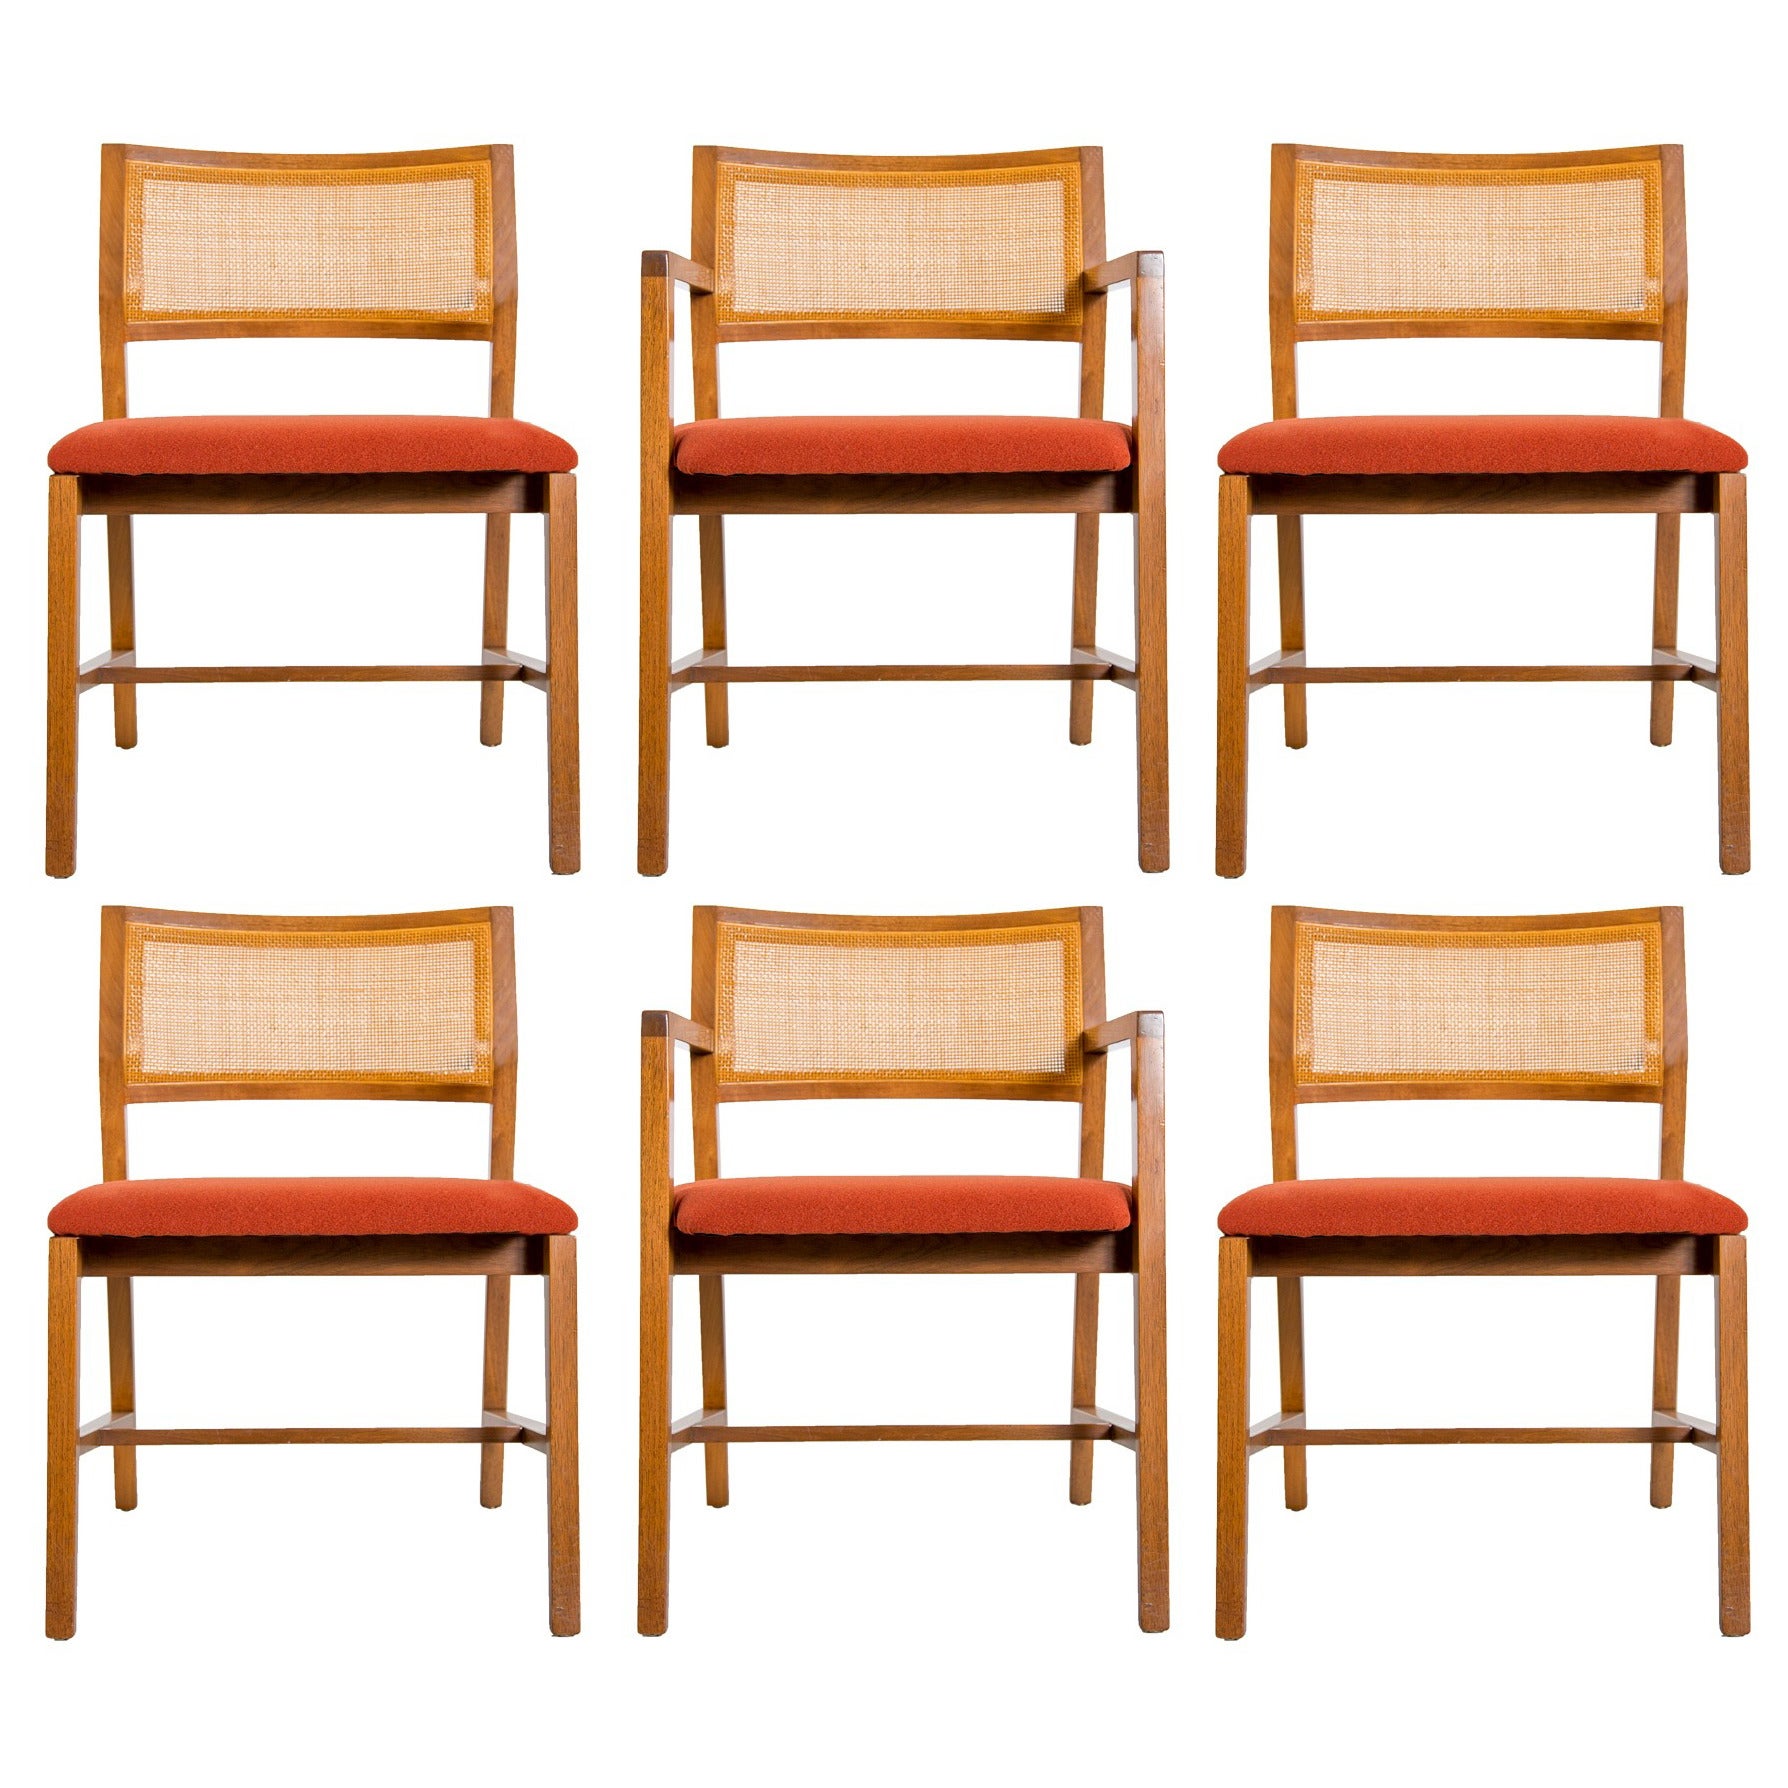 Set of Six Edward Wormley for Dunbar Dining Chairs, 1960s